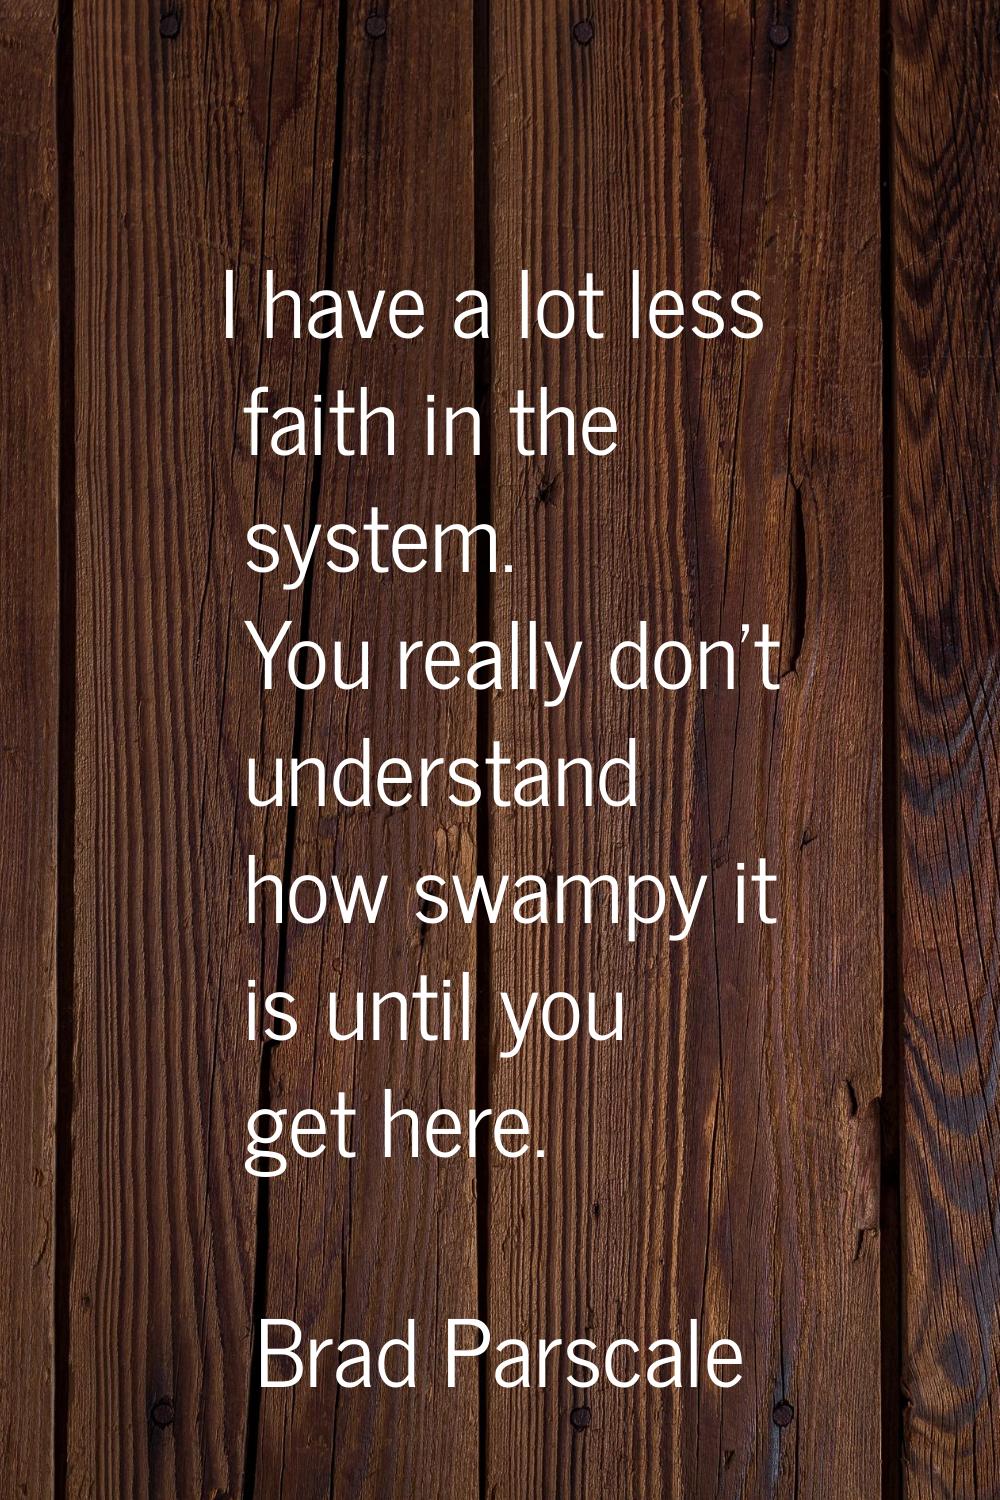 I have a lot less faith in the system. You really don't understand how swampy it is until you get h